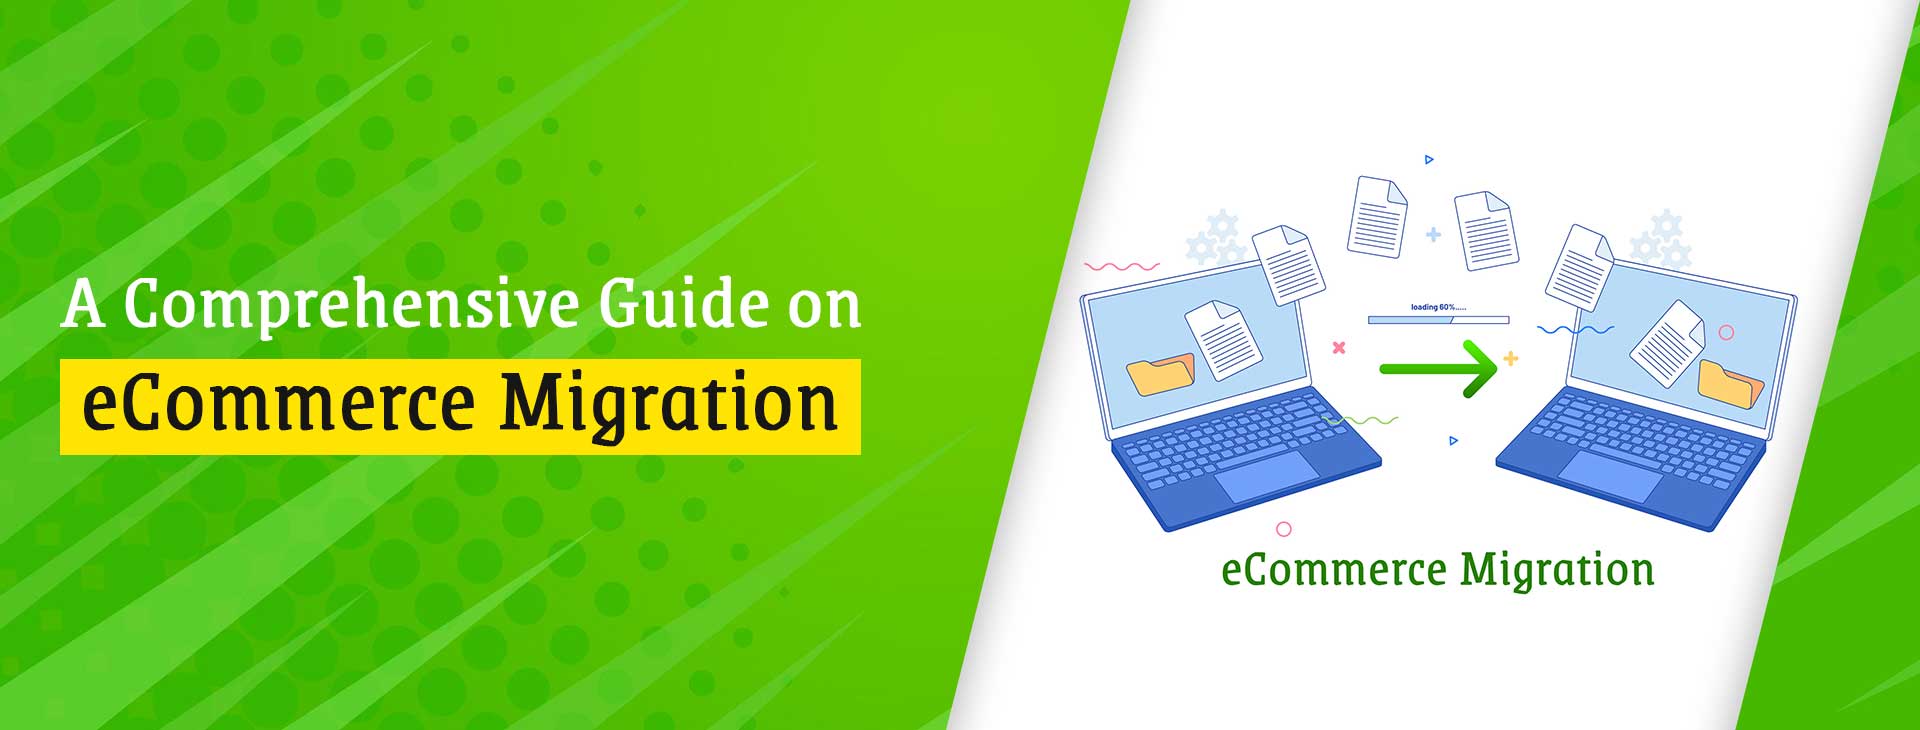 A Comprehensive Guide on eCommerce Migration